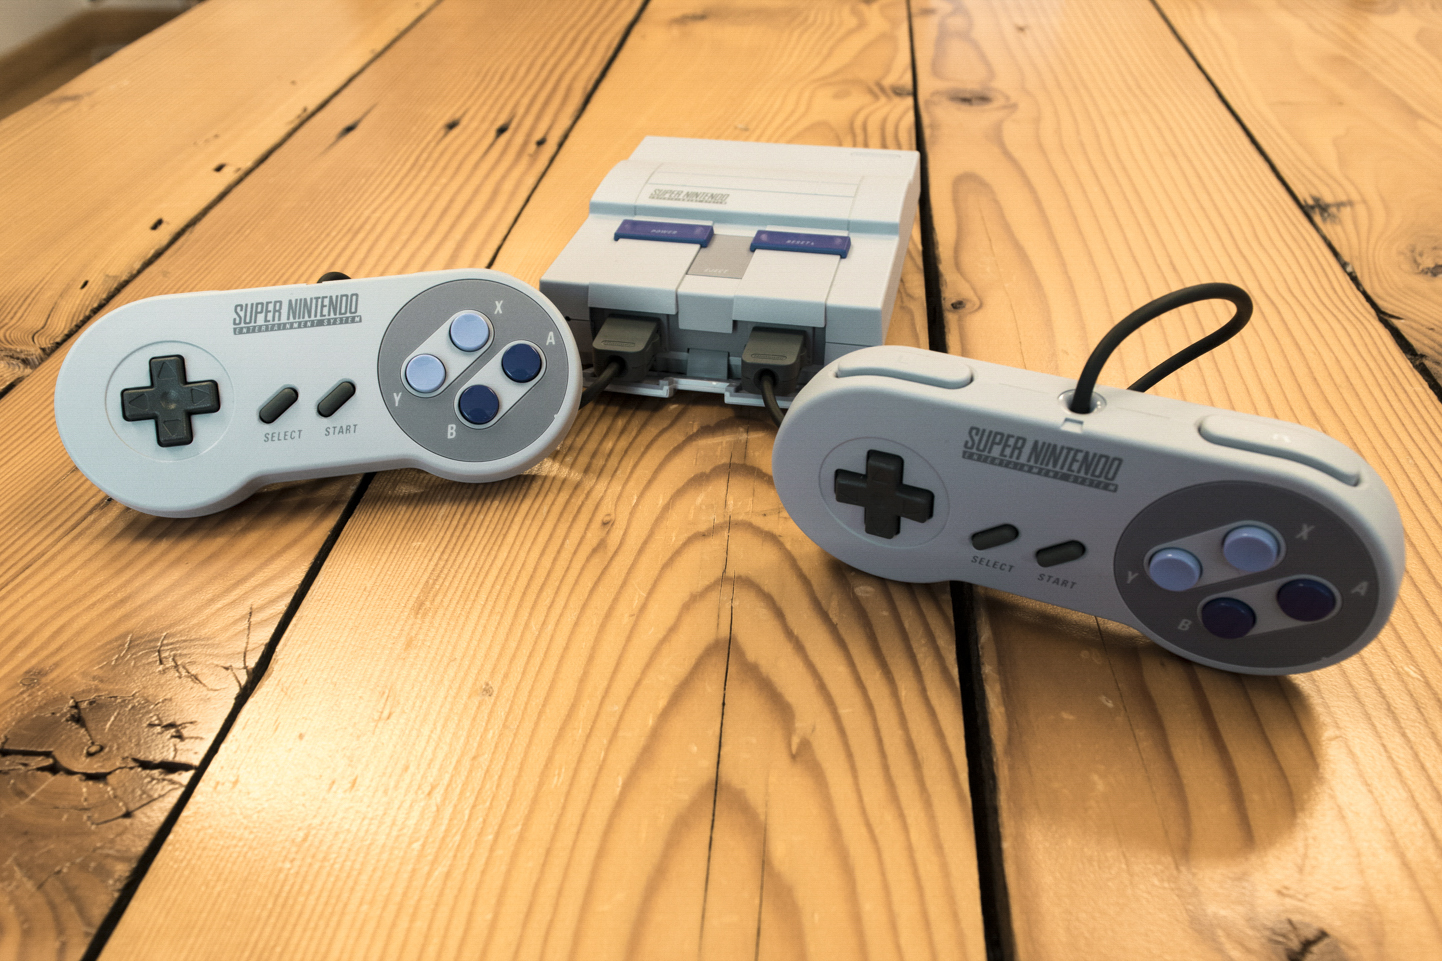 Both controllers in front of the SNES Classic Edition